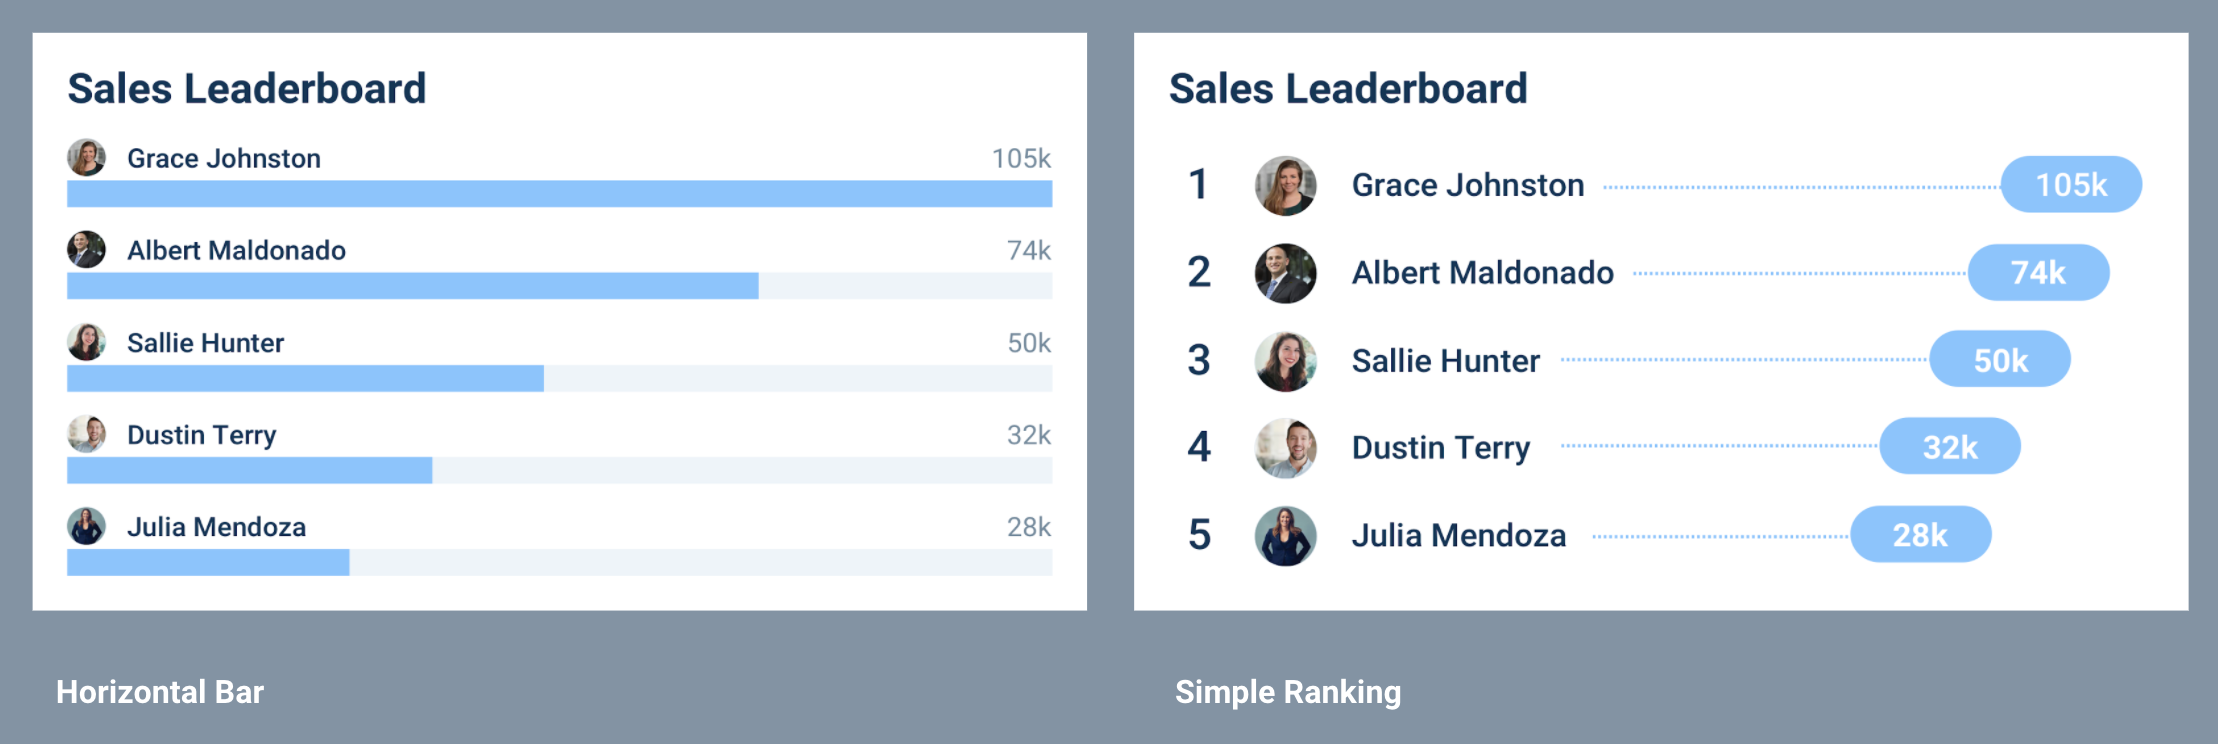 7 Leaderboard templates for intranet dashboards - The 2021 edition